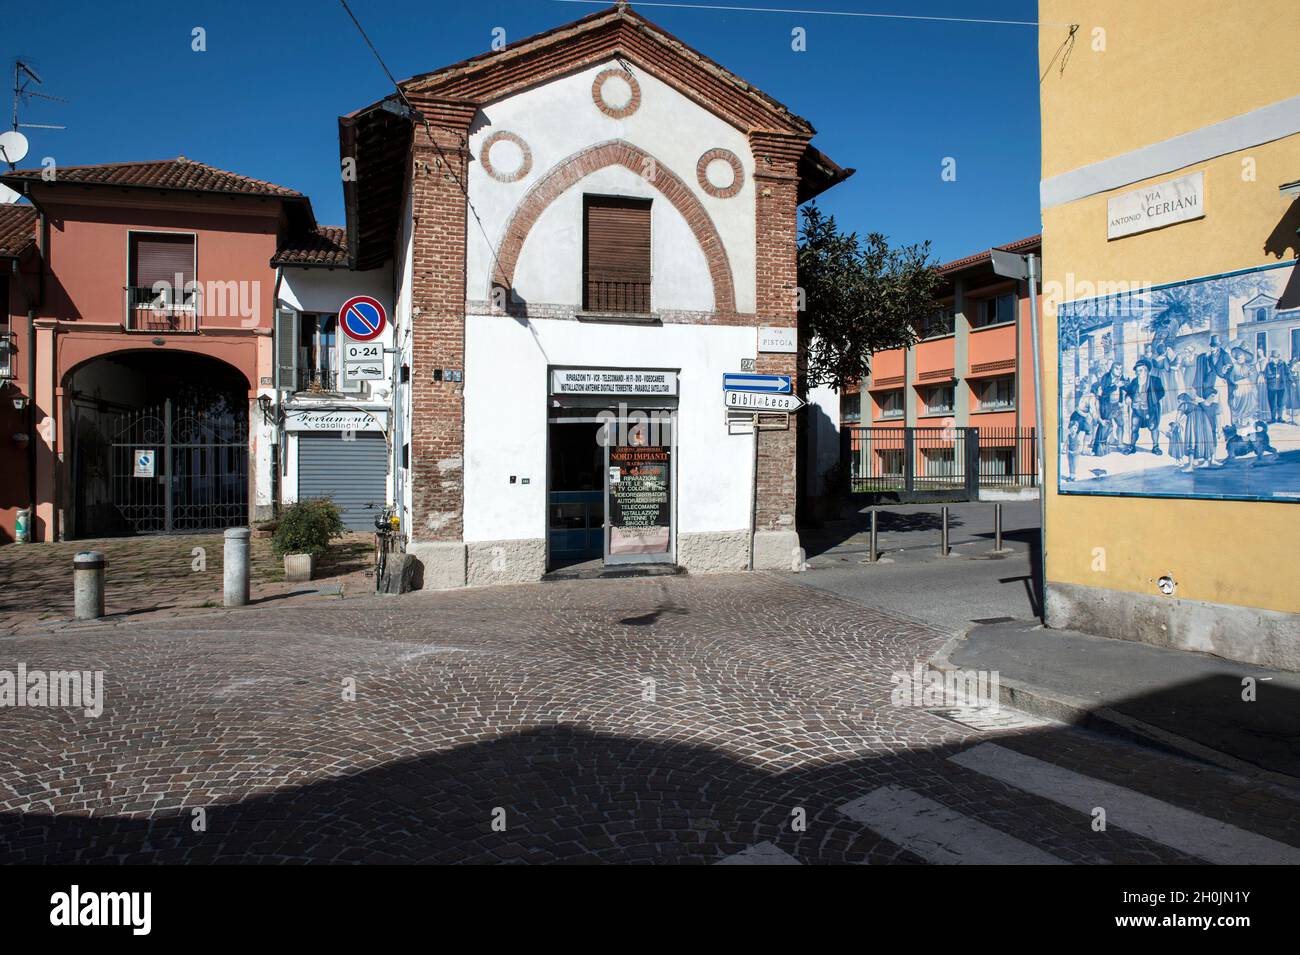 Italy, Lombardy, Milan, Baggio district, old town Stock Photo